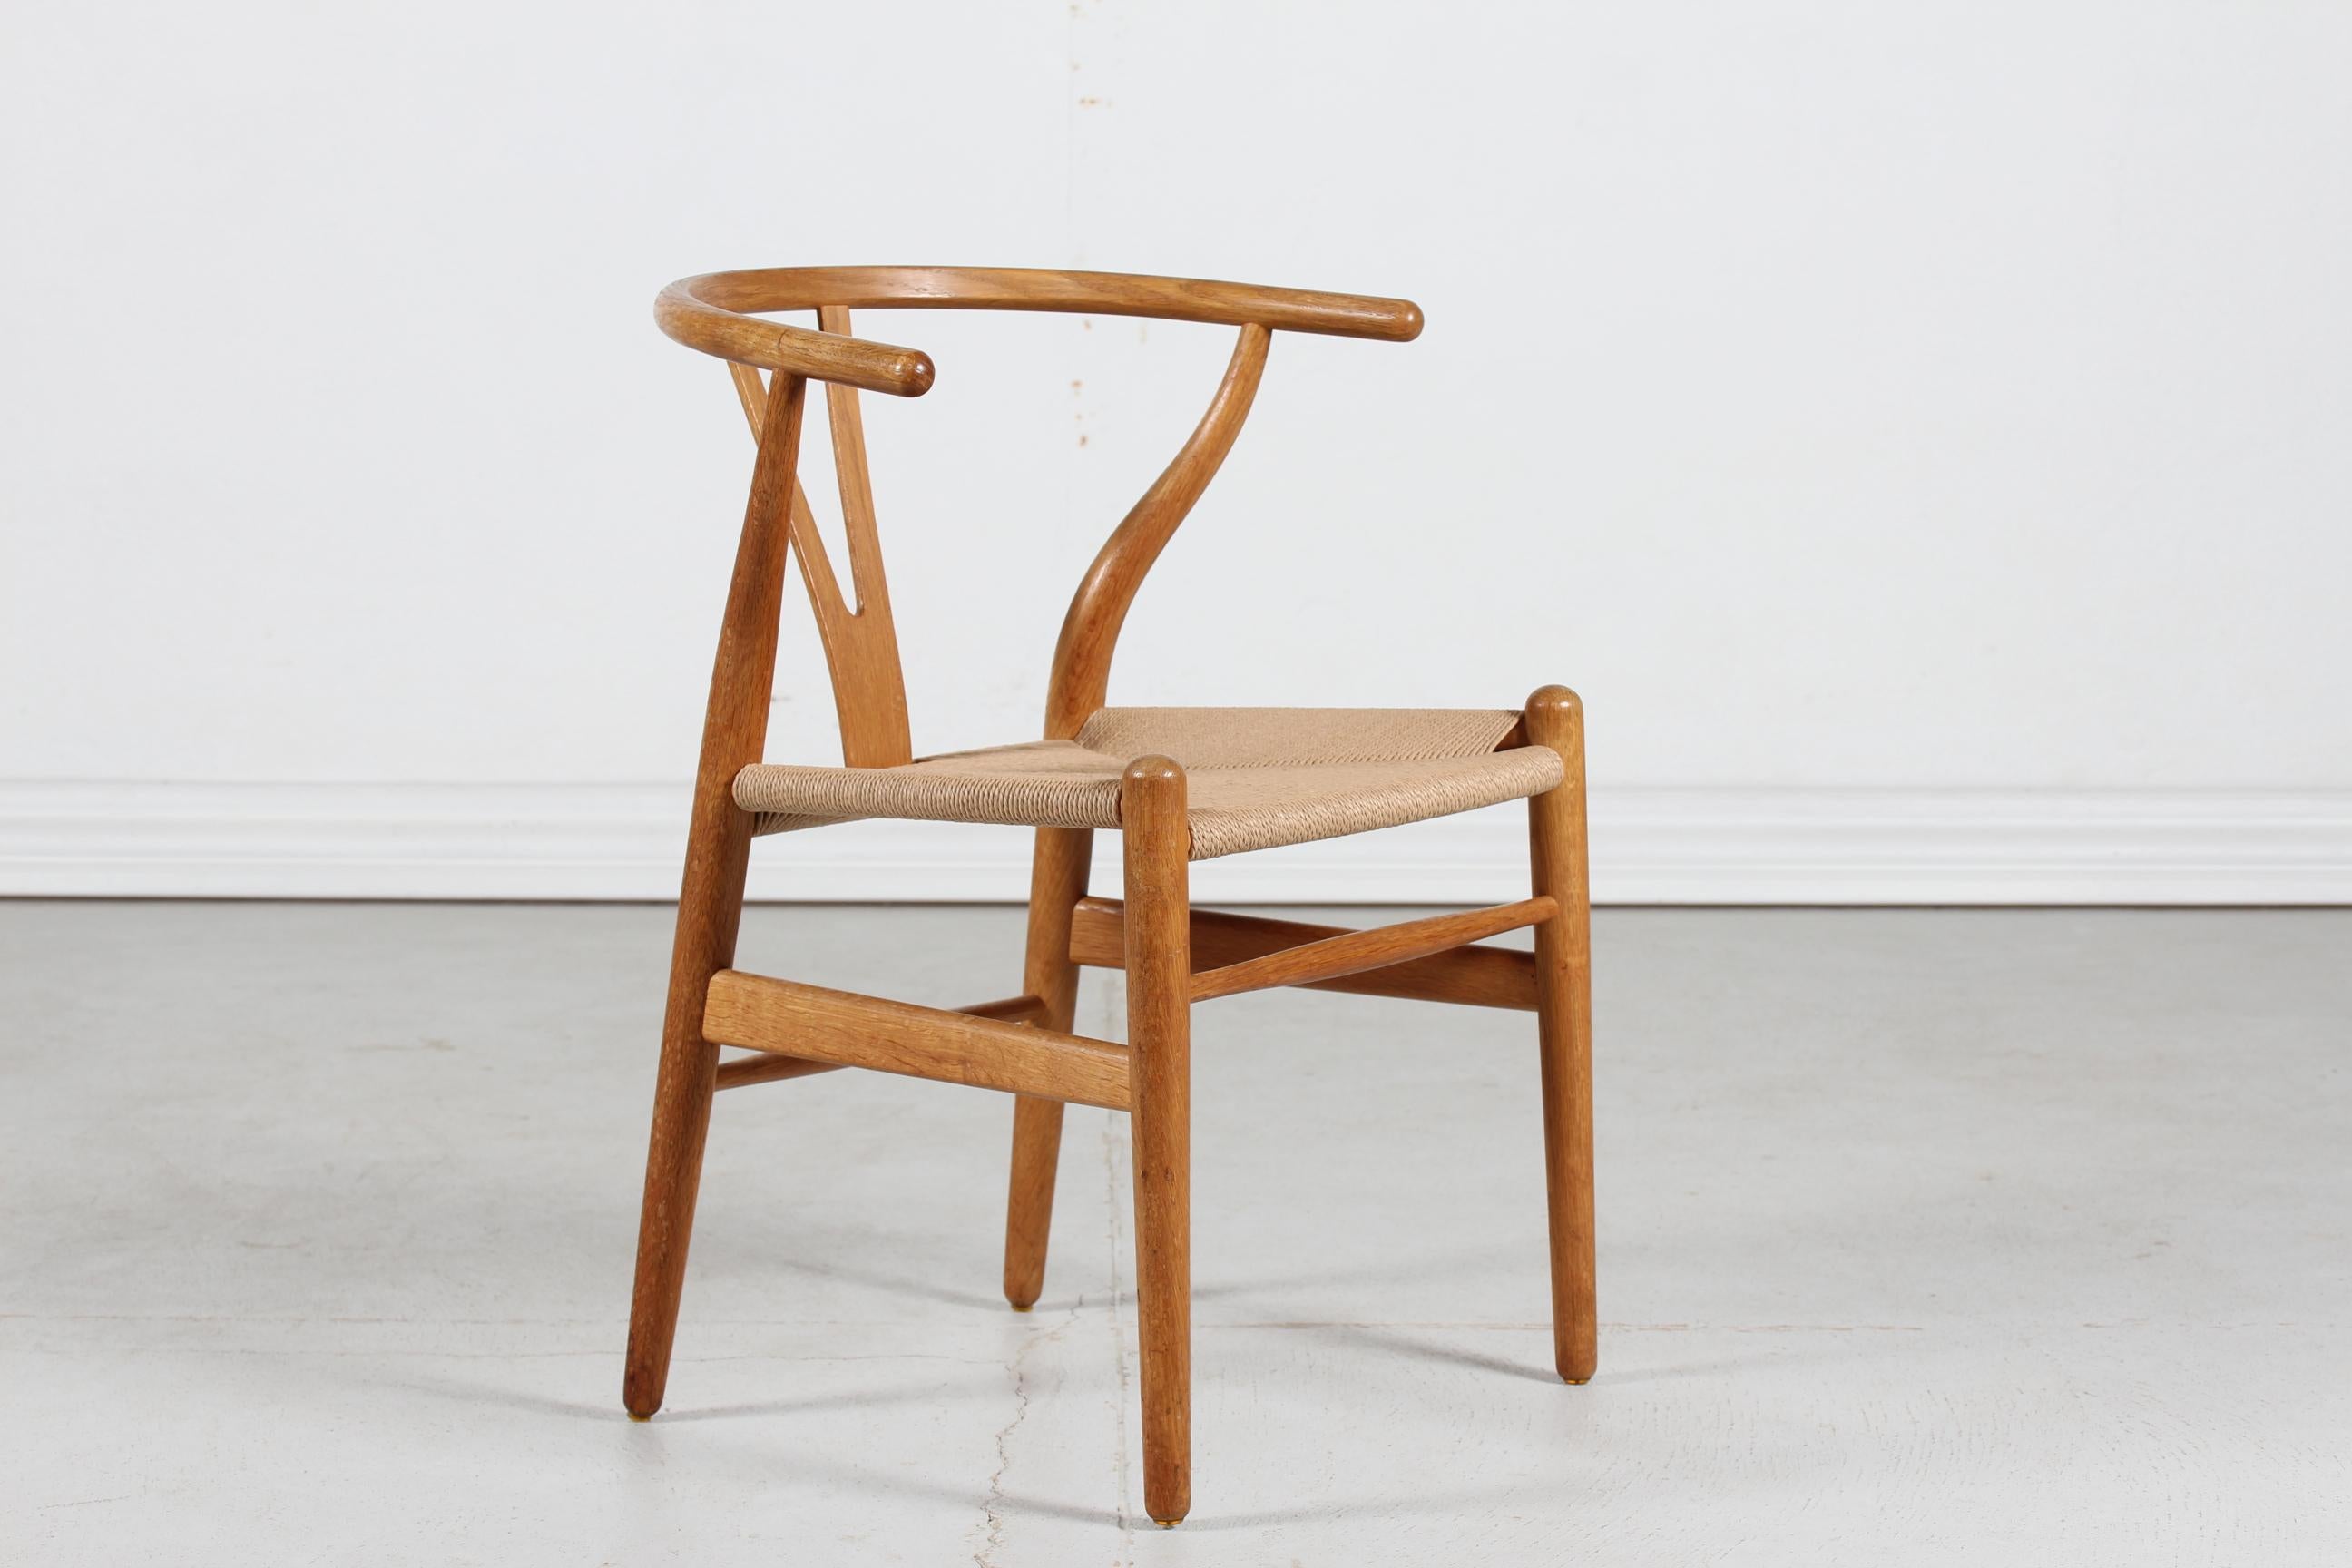 An early version of Hans J. Wegner´s (1914-2007) wishbone chair.
Model no. CH 24 manufactured by Carl Hansen & Son, Denmark.
The wishbone chair has been in production since 1950.

The chair is made of solid oak with new paper cord seat.

Very